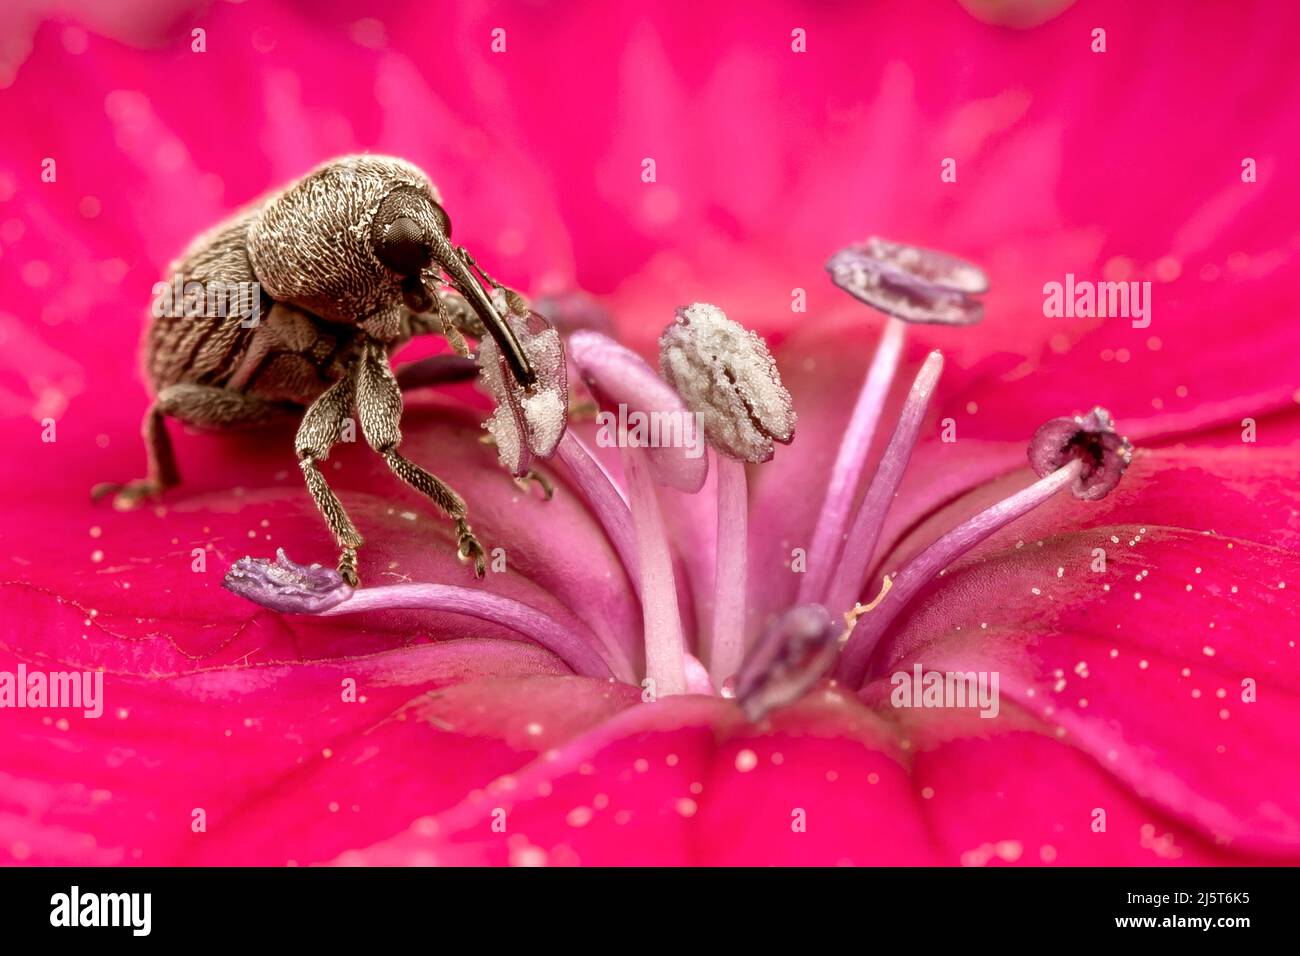 Brown Hylobius bug eating pollen on a bright pink flower bud Stock Photo